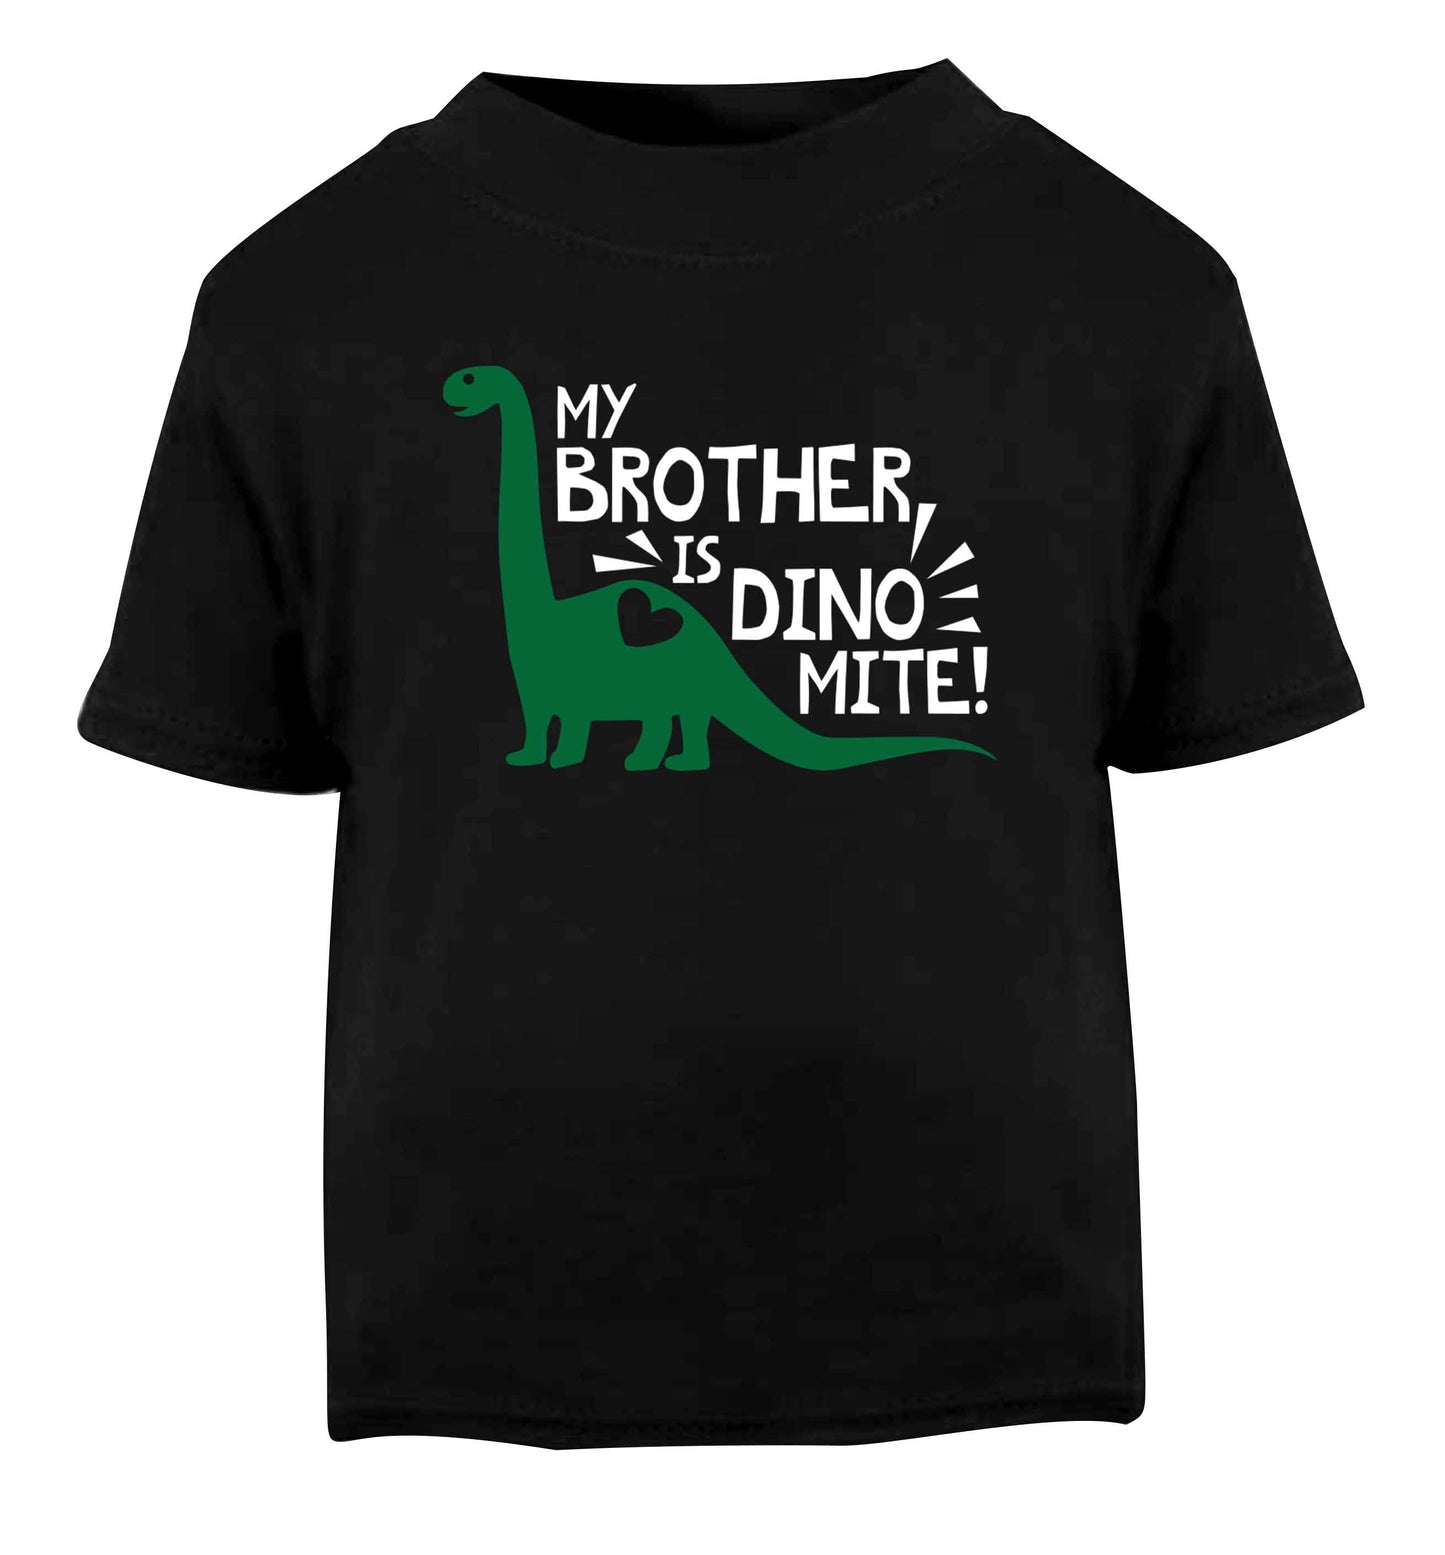 My brother is dinomite! Black Baby Toddler Tshirt 2 years